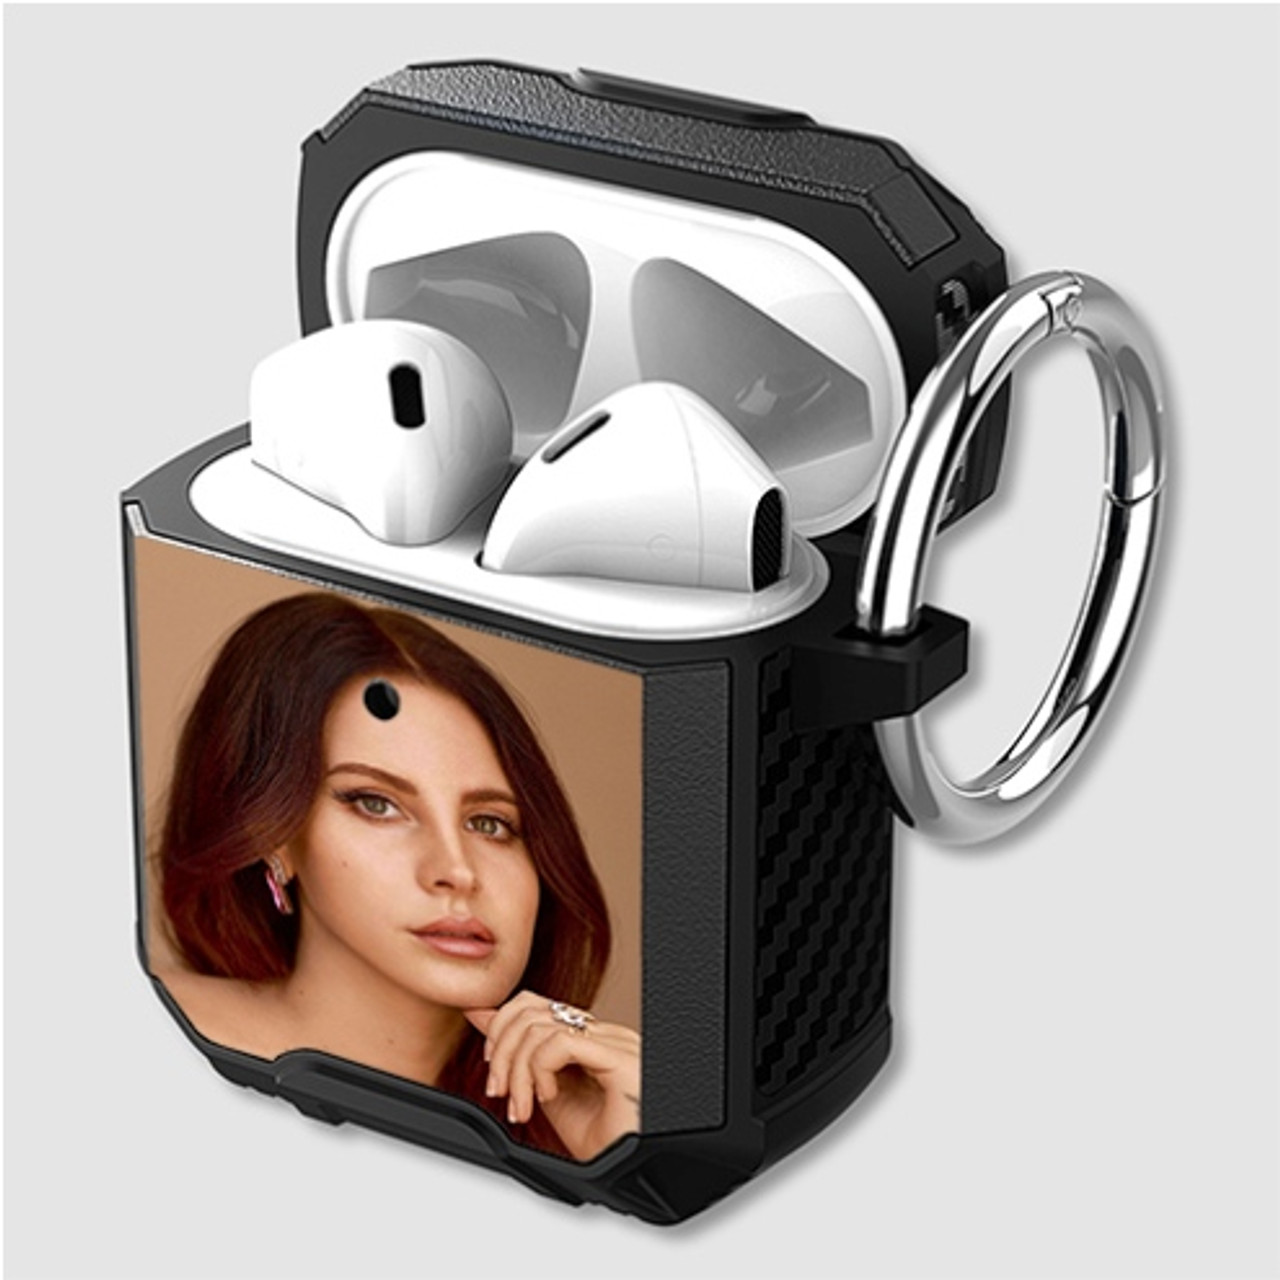 Lana del rey art custom personalized airpods case shockproof cover the best smart protective cover